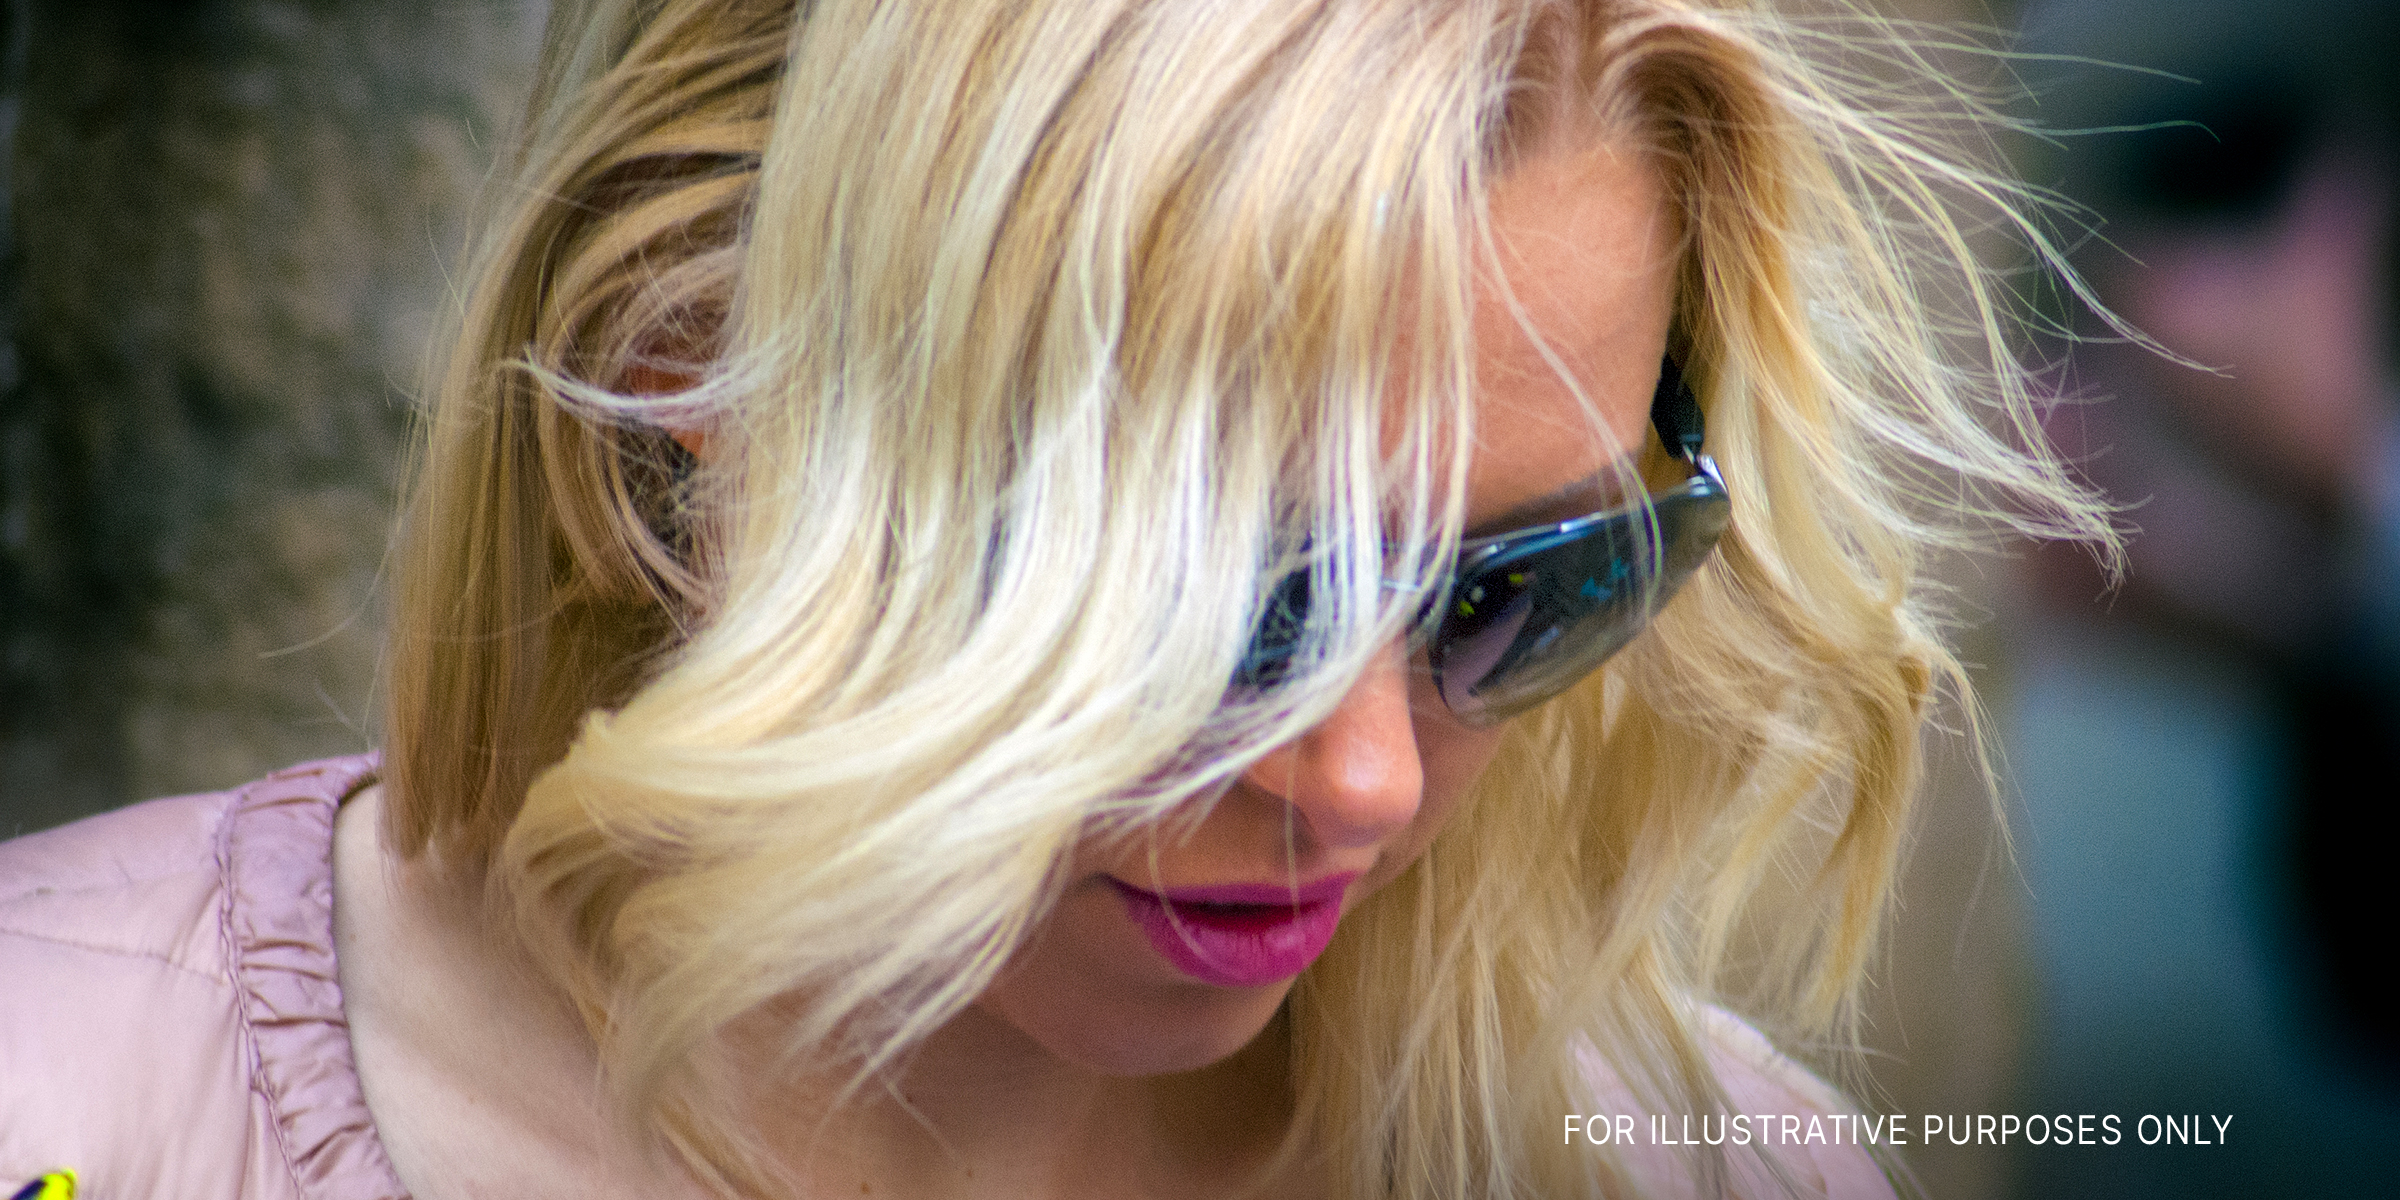 A Blonde-Haired Woman Looking Down While Wearing Sunglasses | Source: Flickr.com/g_u/CC BY-SA 2.0